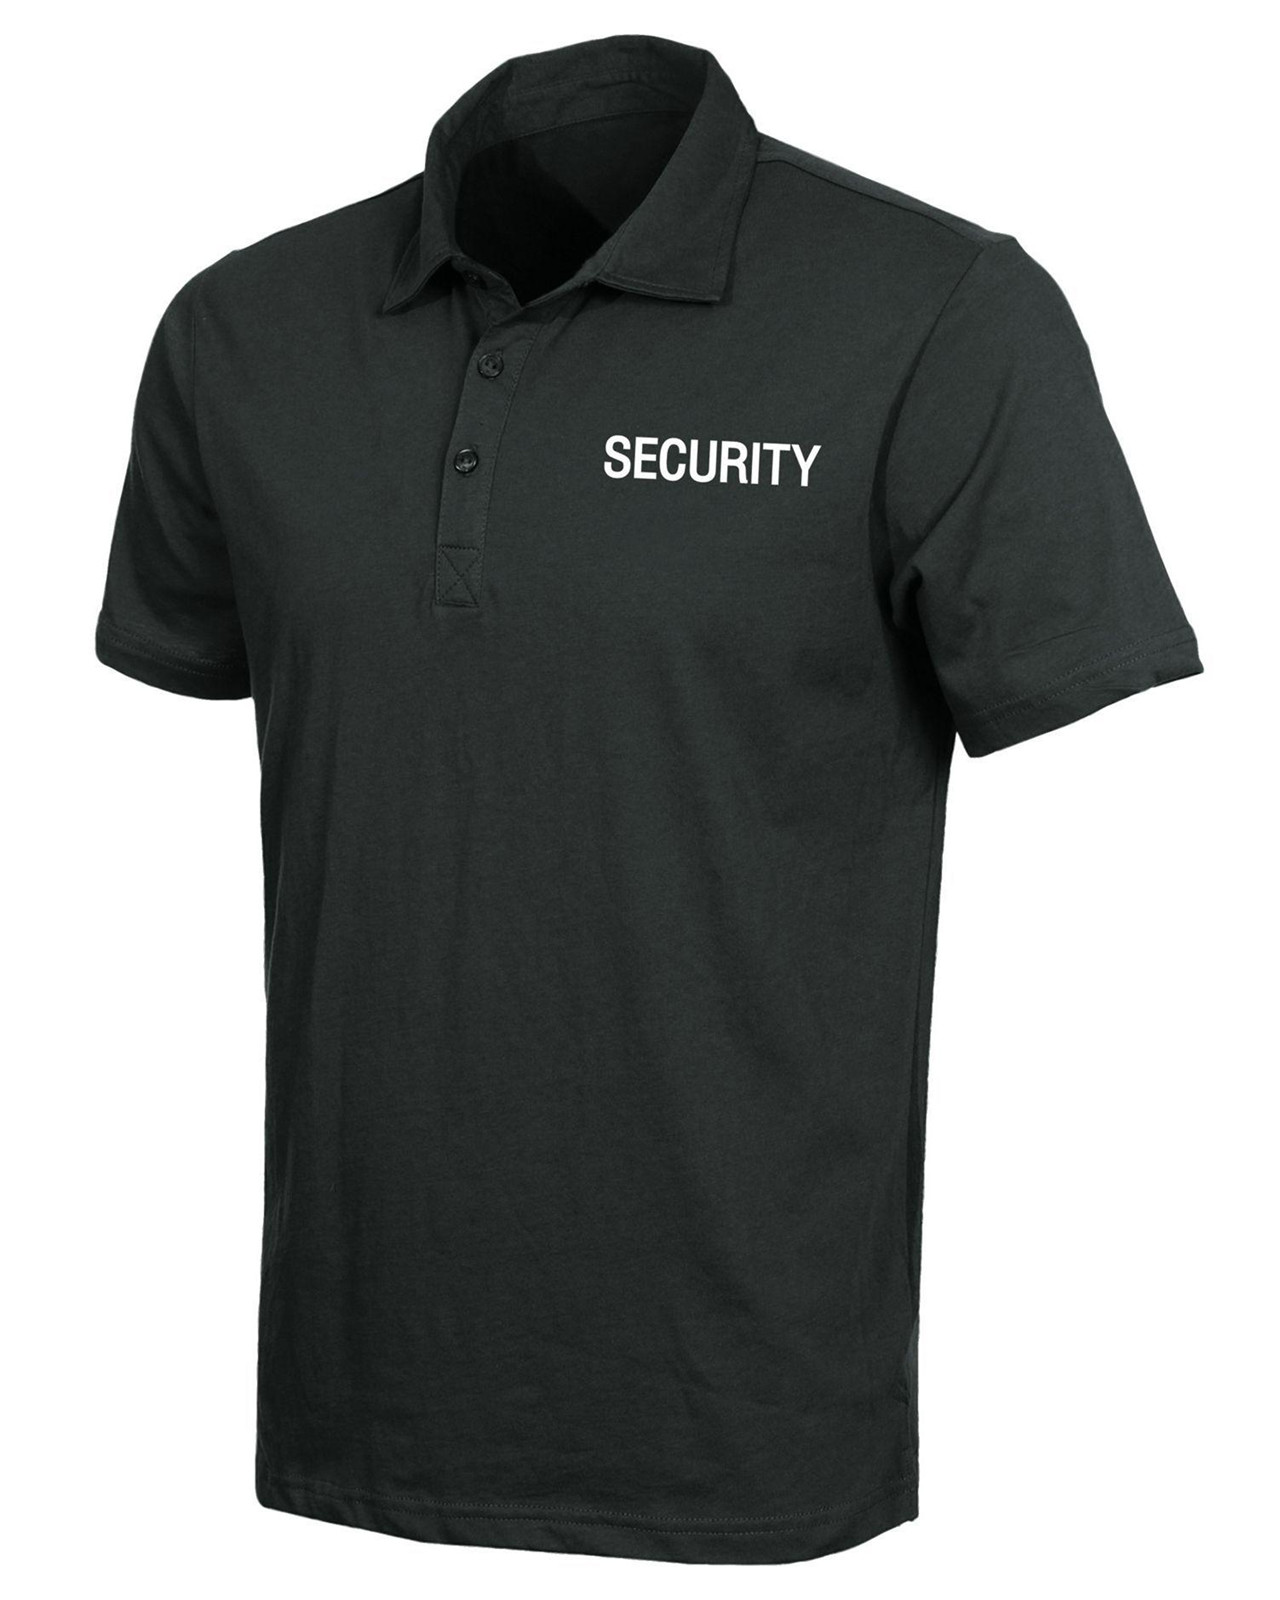 Rothco Svedtransporterende Polo T-shirt (Sort m. Security, M)